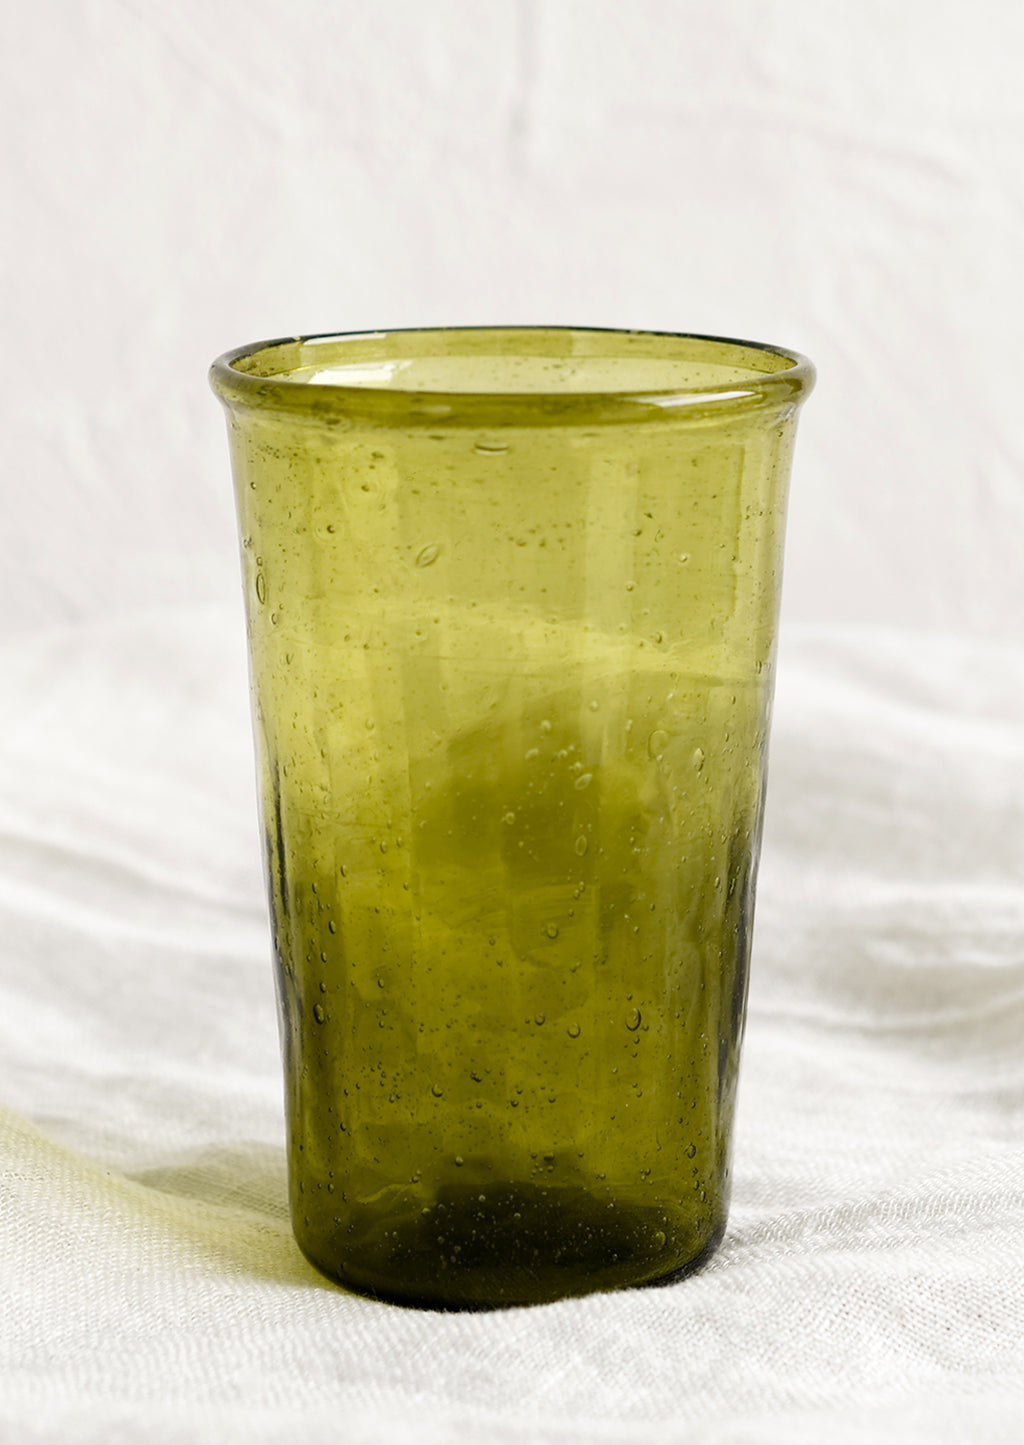 Olive: A glass tumbler in olive green color.